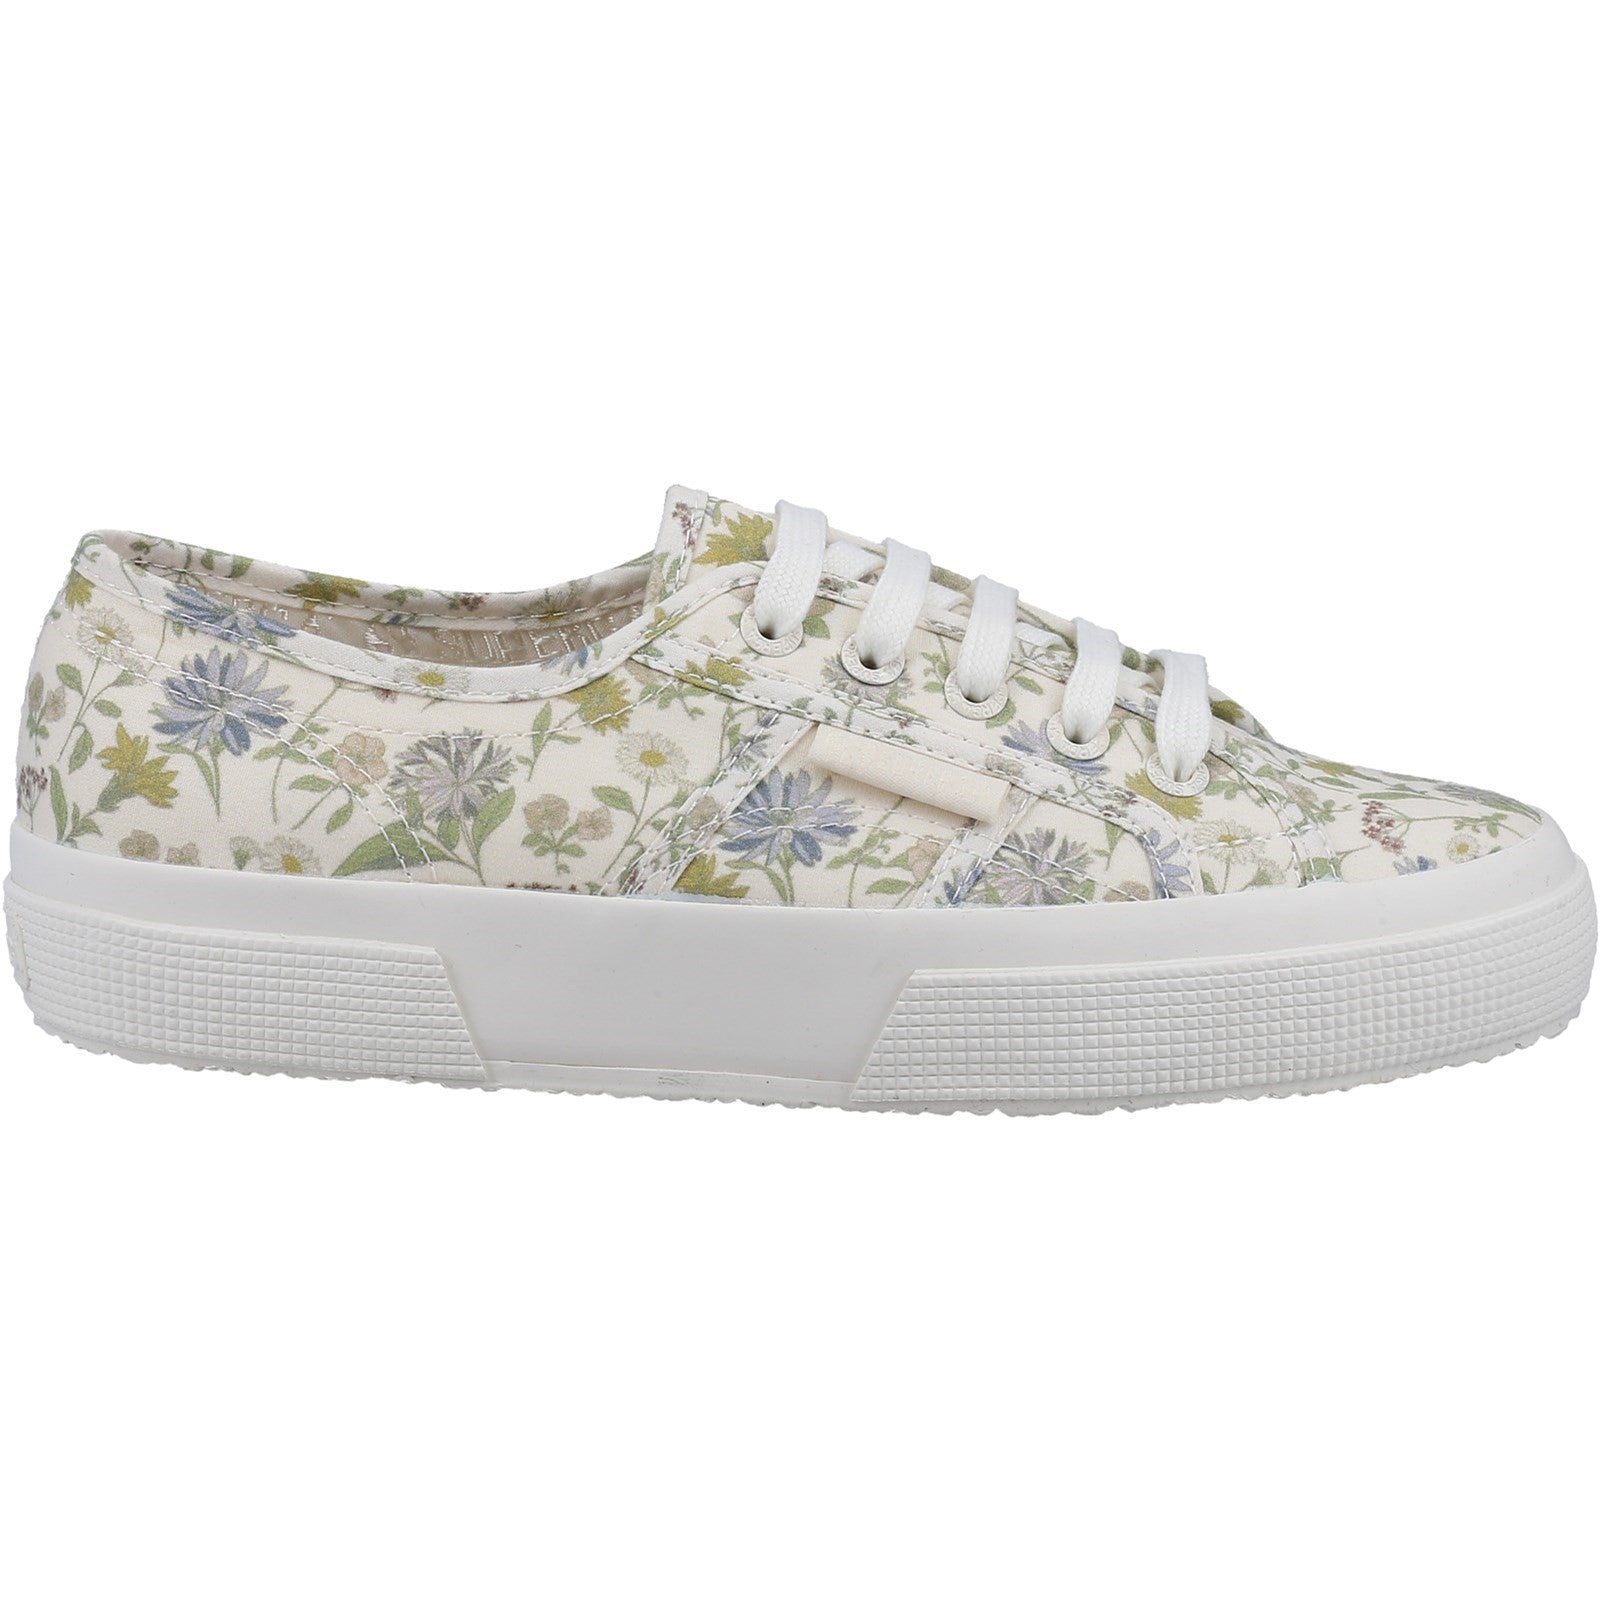 Superga Womens 2750 Floral Print Trainers - Light Olive